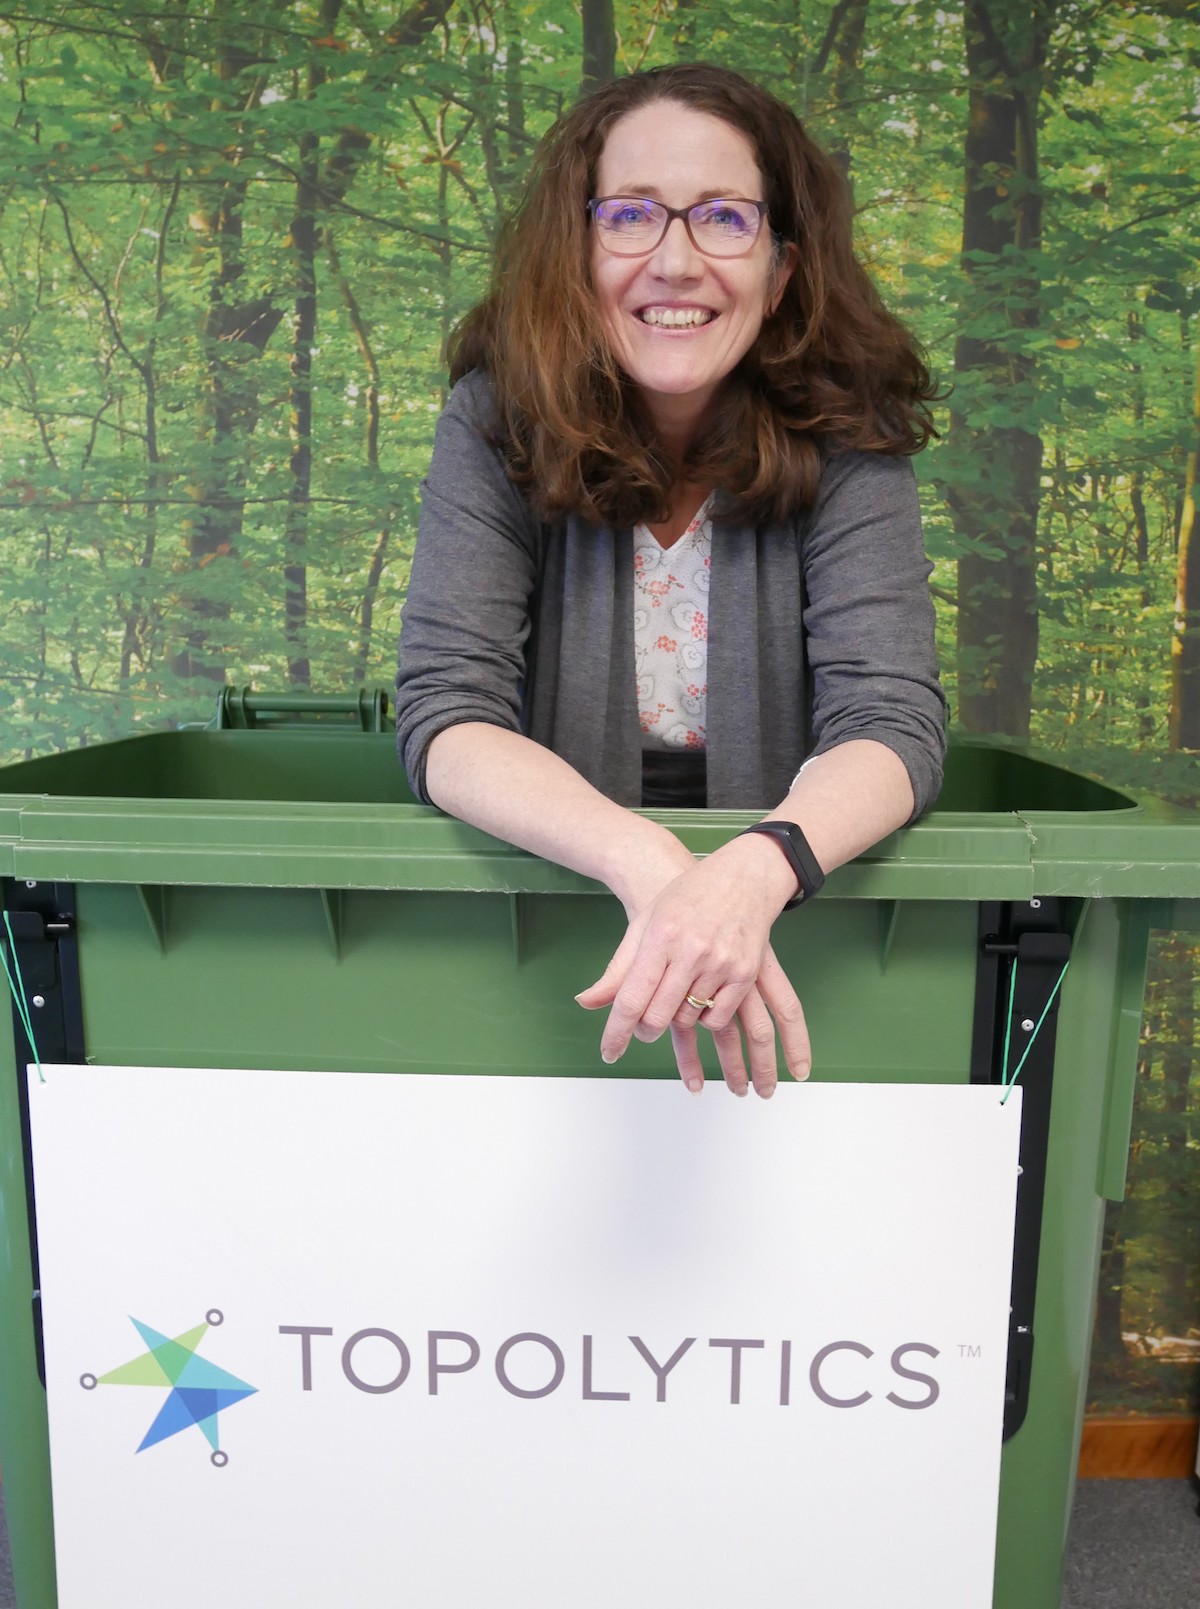 Topolytics brings on Fleur Ruckley as its head of implementation